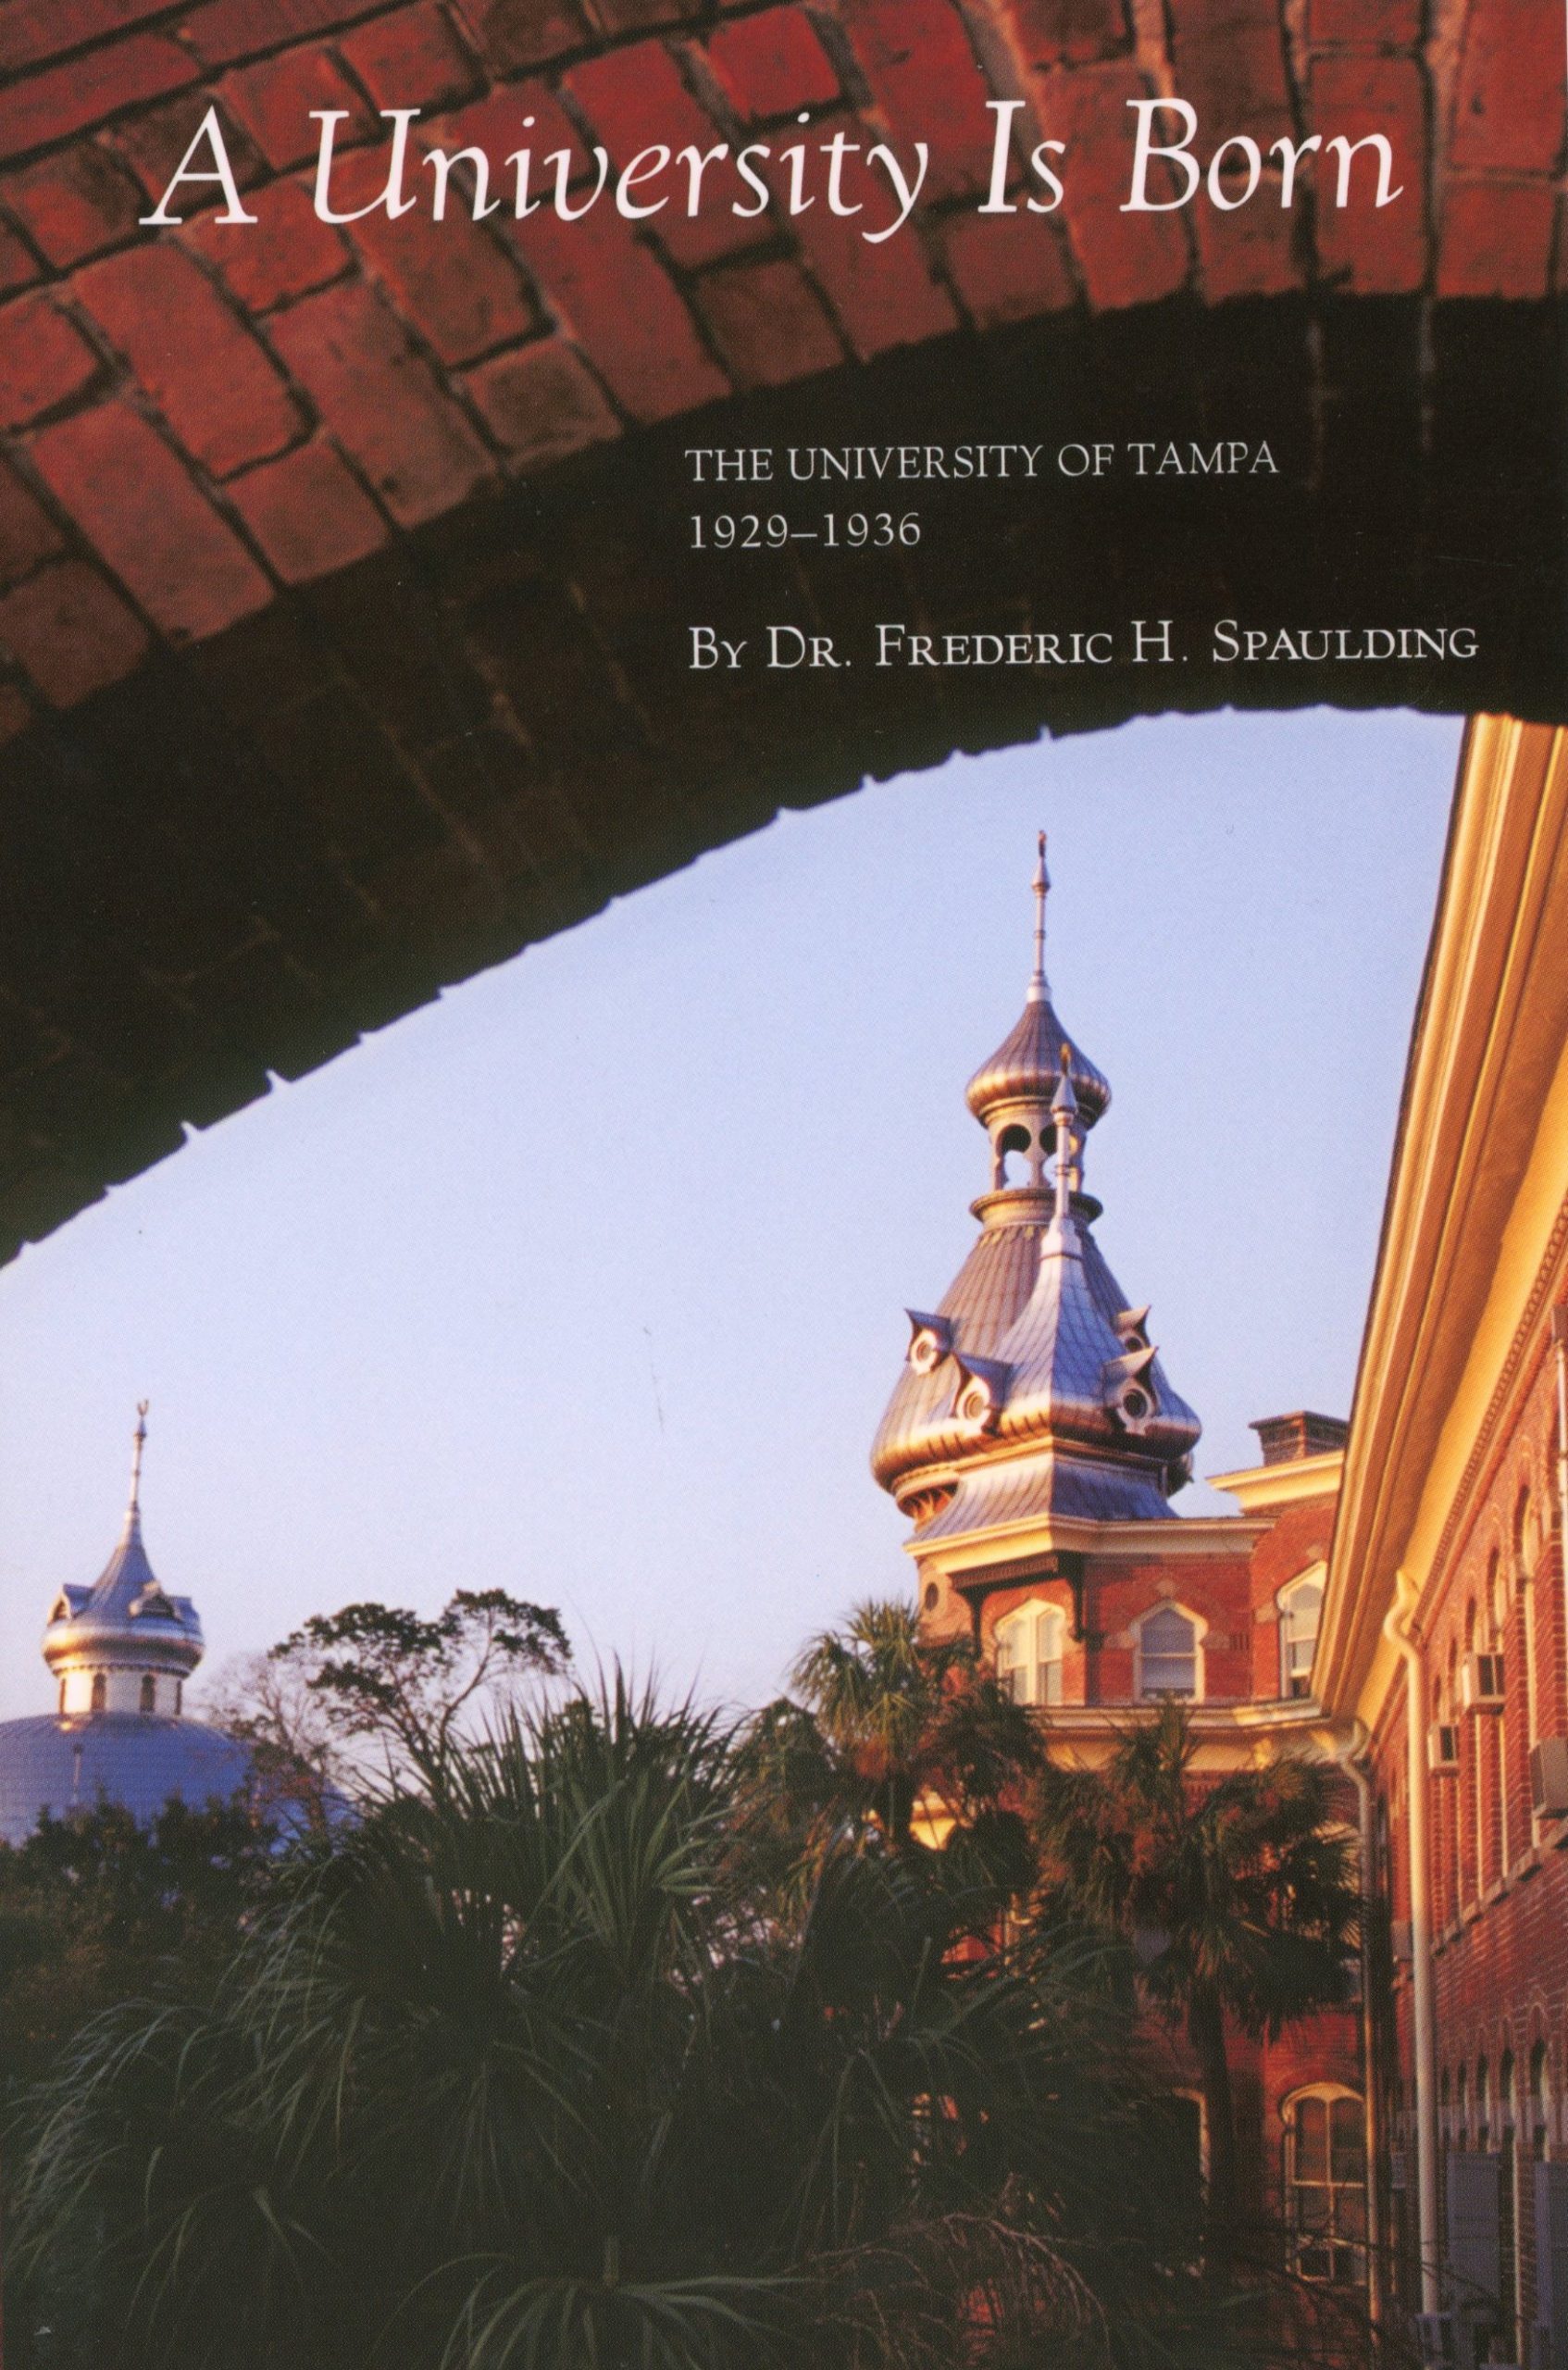 Image of the front cover of A University is Born